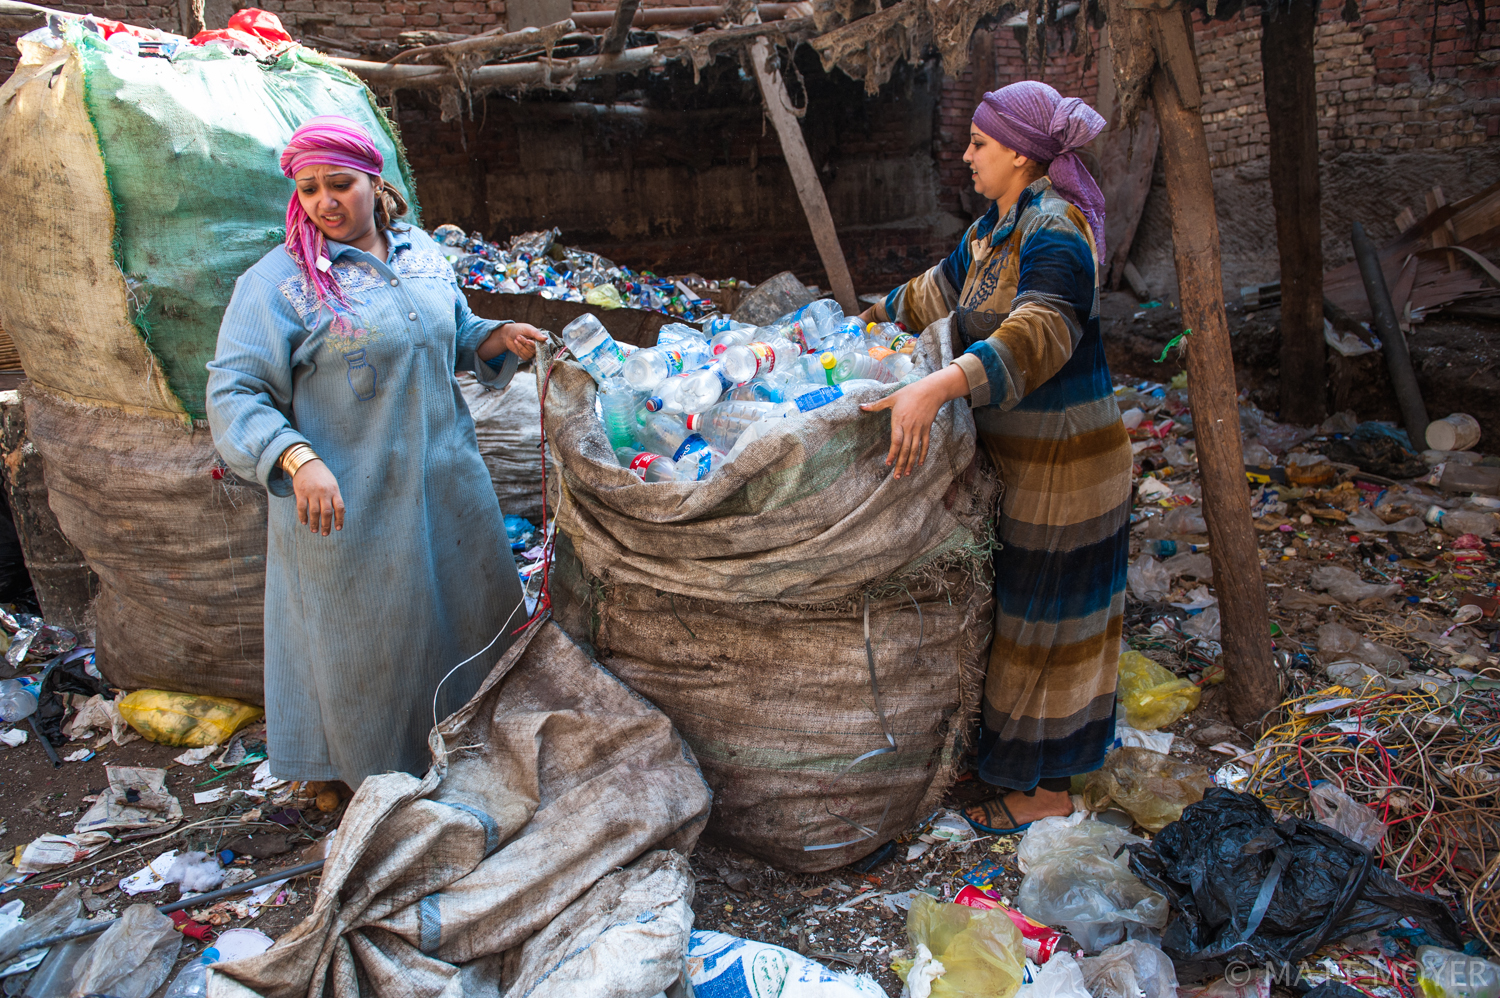  Egyptians work sorting trash in a Coptic Christian neighborhood in Cairo. Most of the people who work collecting garbage in Cairo are Coptic Christians. 